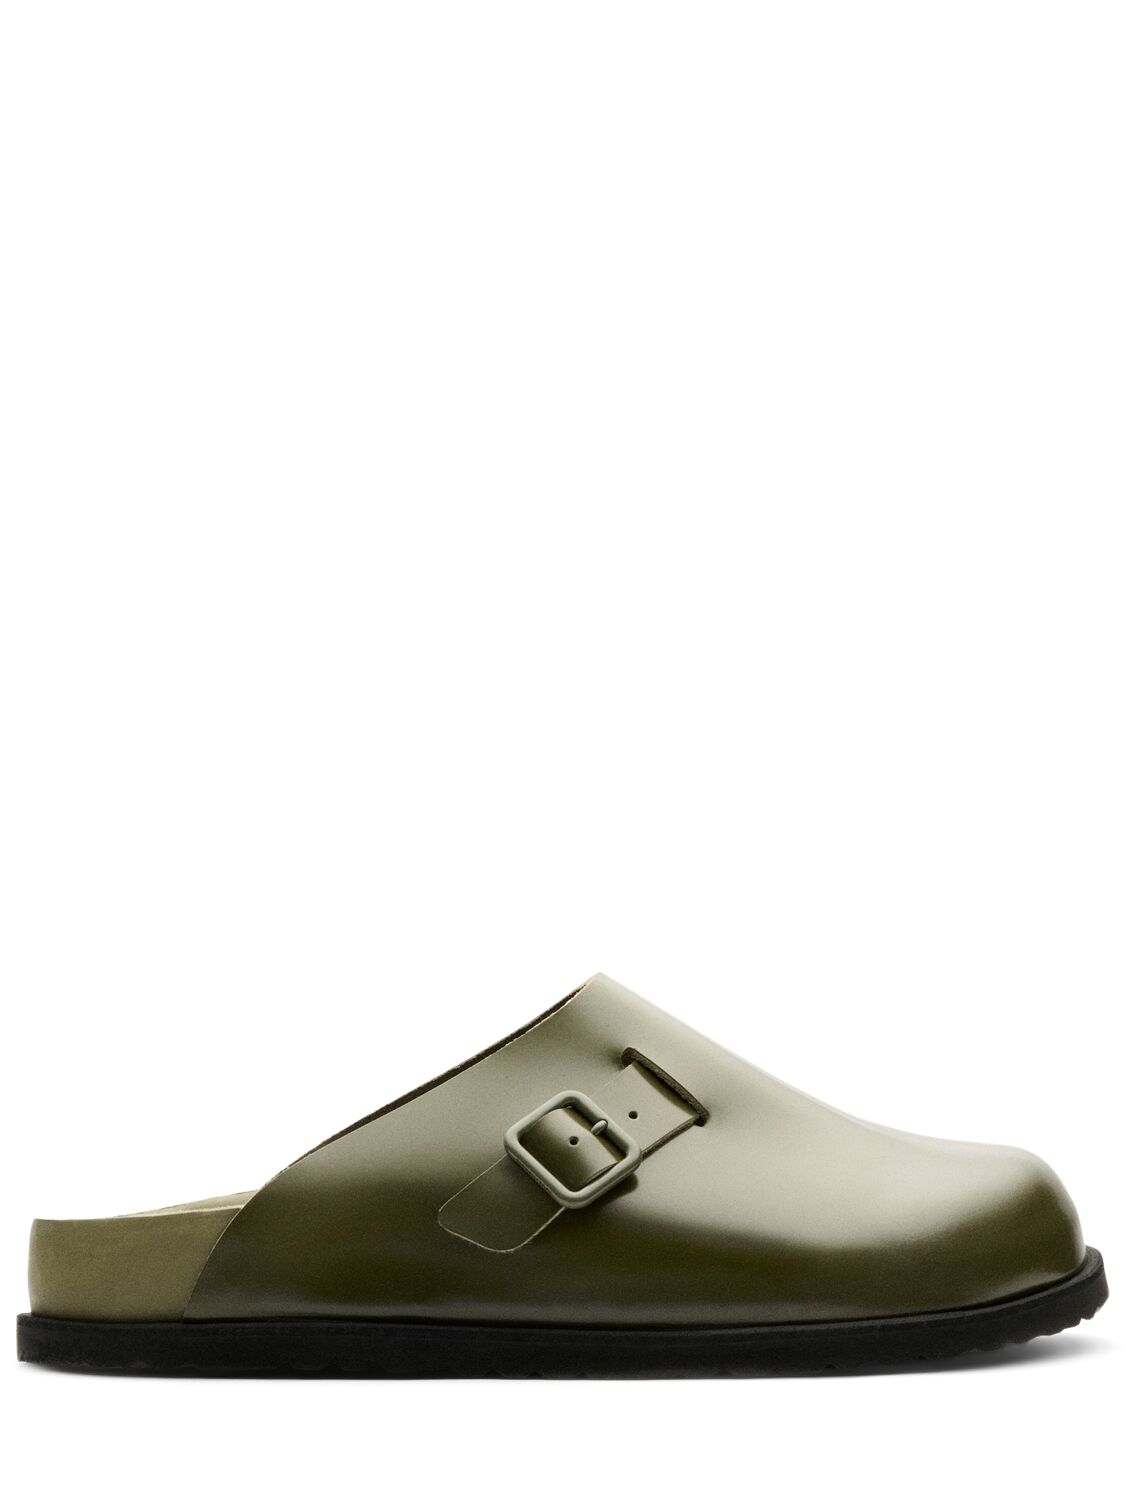 Birkenstock 1774 Niamay Shiny Leather Sandals In Green